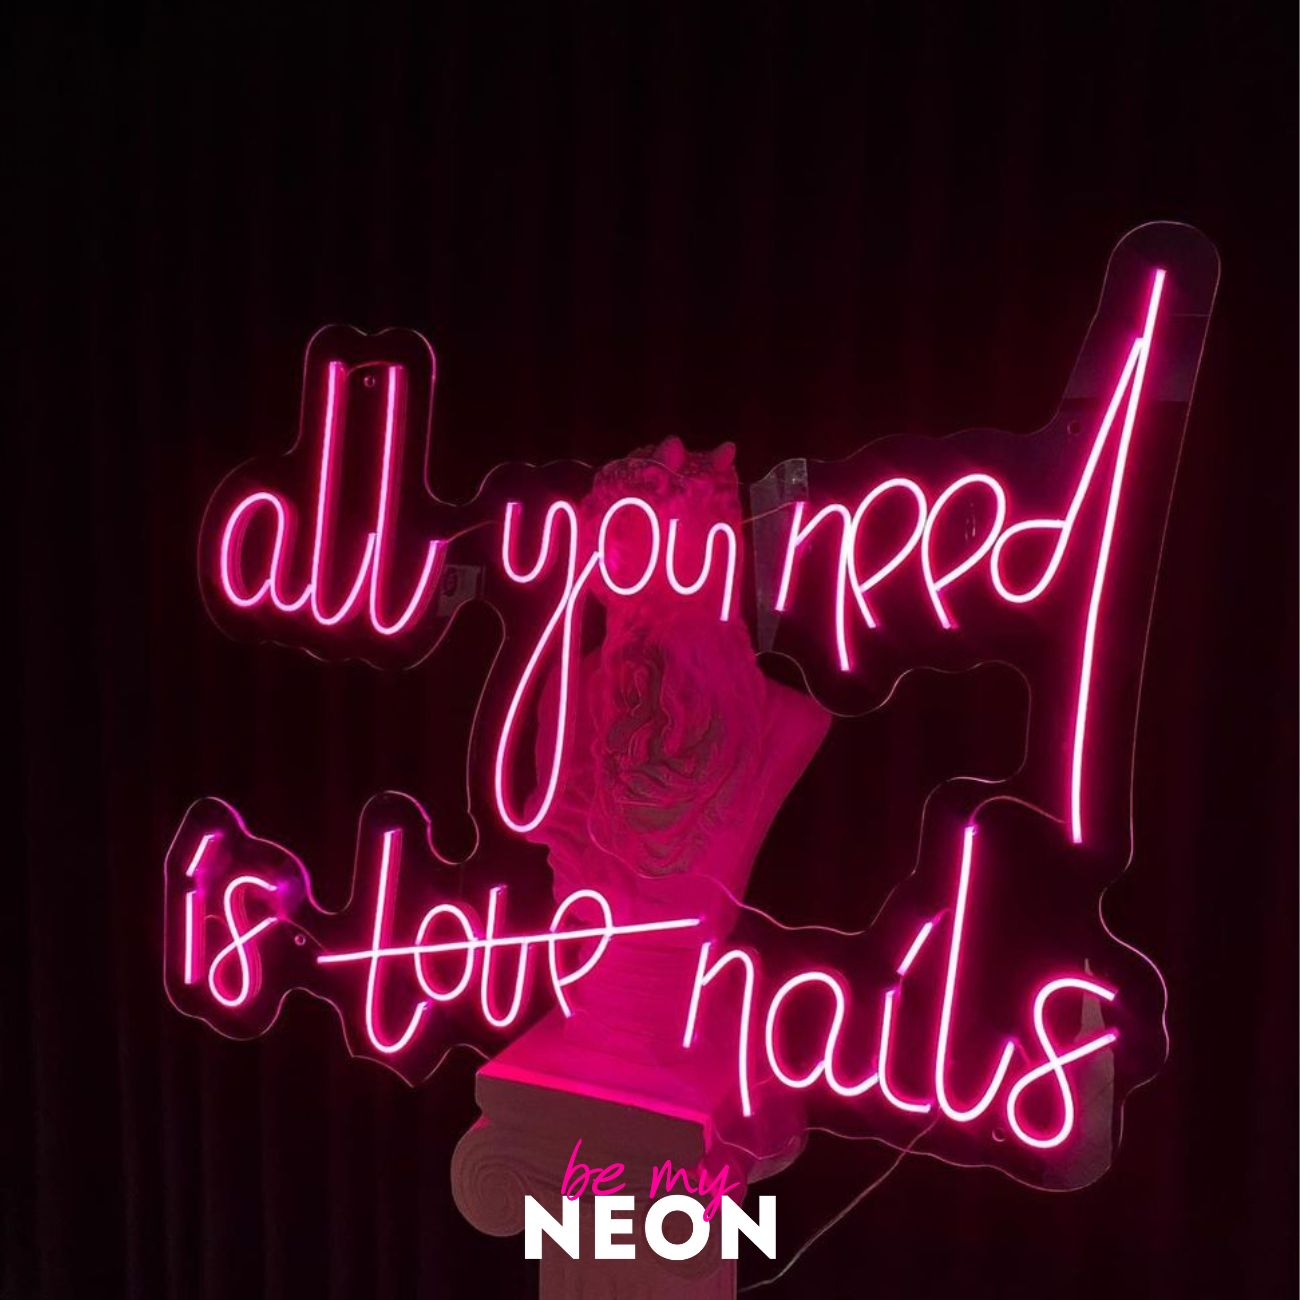 "all you need is love nails" LED Neonschild